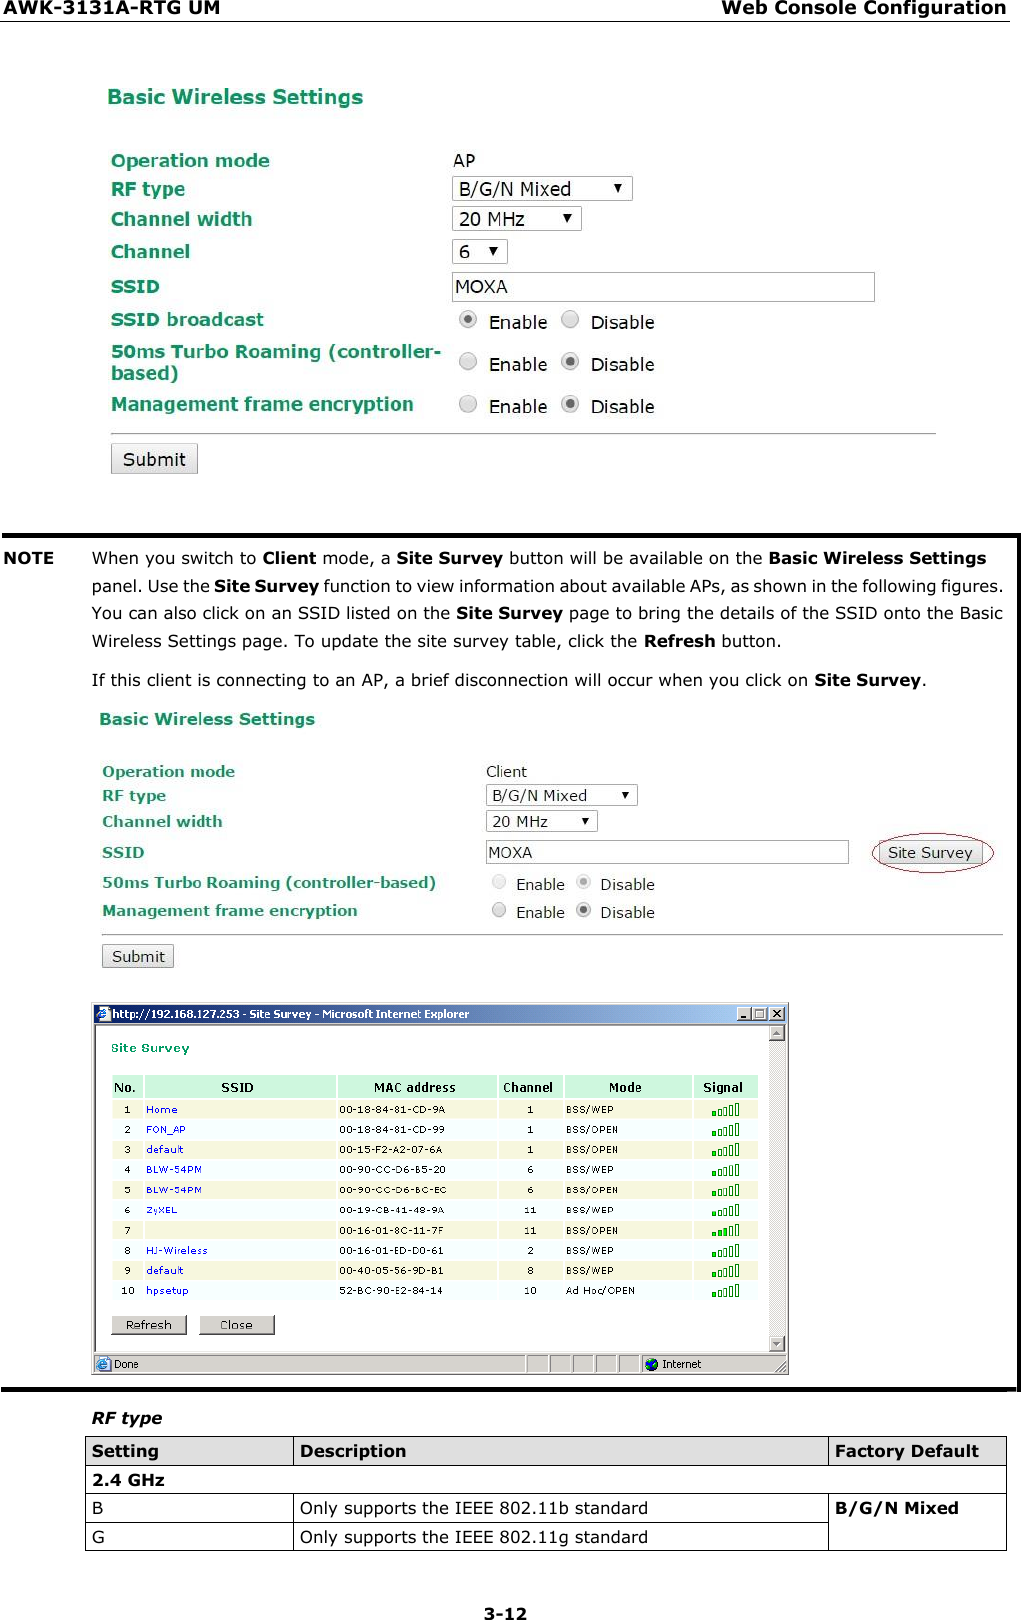 AWK-3131A-RTG UM Web Console Configuration 3-12        NOTE When you switch to Client mode, a Site Survey button will be available on the Basic Wireless Settings panel. Use the Site Survey function to view information about available APs, as shown in the following figures. You can also click on an SSID listed on the Site Survey page to bring the details of the SSID onto the Basic Wireless Settings page. To update the site survey table, click the Refresh button. If this client is connecting to an AP, a brief disconnection will occur when you click on Site Survey.                    RF type  Setting Description Factory Default 2.4 GHz B Only supports the IEEE 802.11b standard B/G/N Mixed G Only supports the IEEE 802.11g standard 